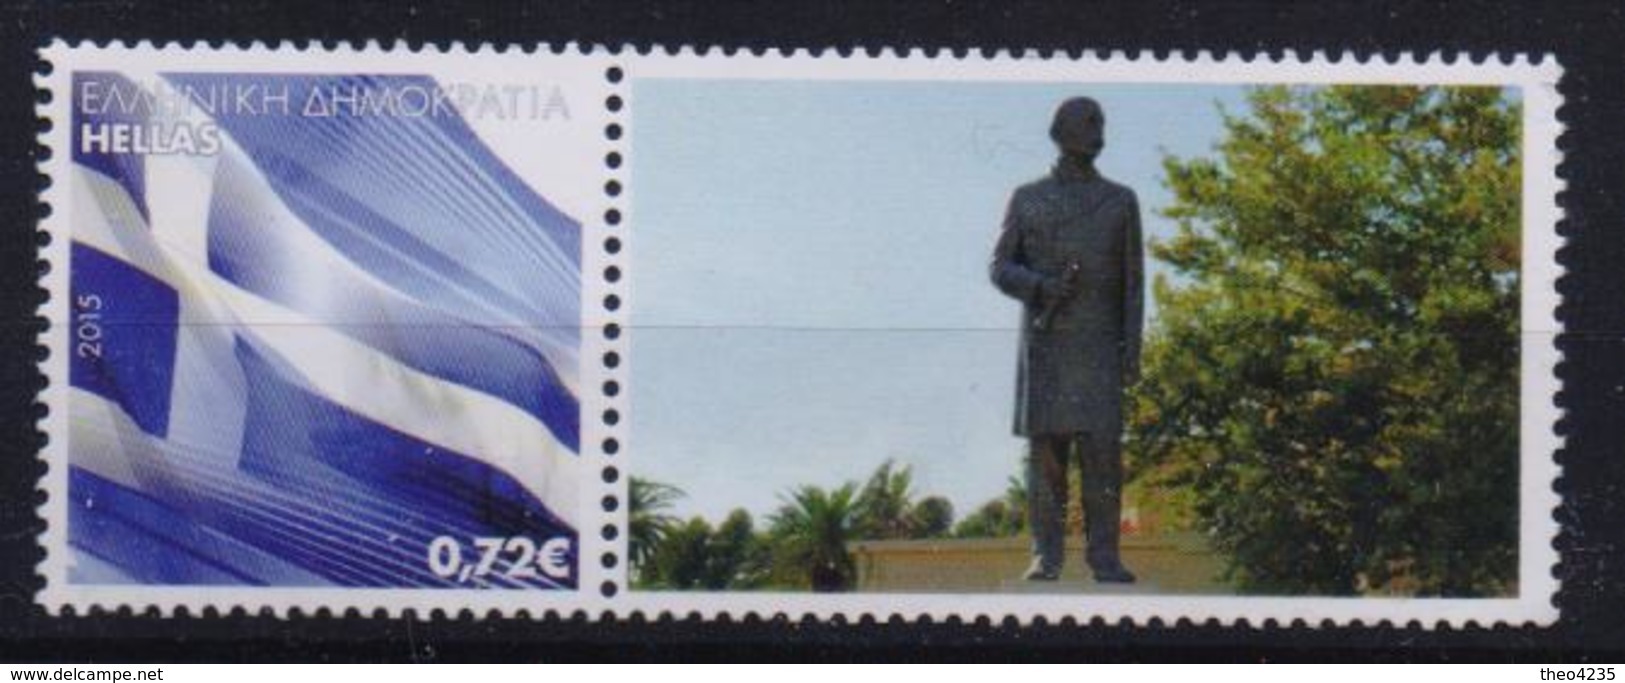 GREECE STAMPS PERSONAL STAMP WITH LABEL/ EXODUS CELEBRATIONS OF SACRED TOWN MESOLOGGI-CHARILAOS TRIKOUPIS/-8/4/17-MNH - Ungebraucht